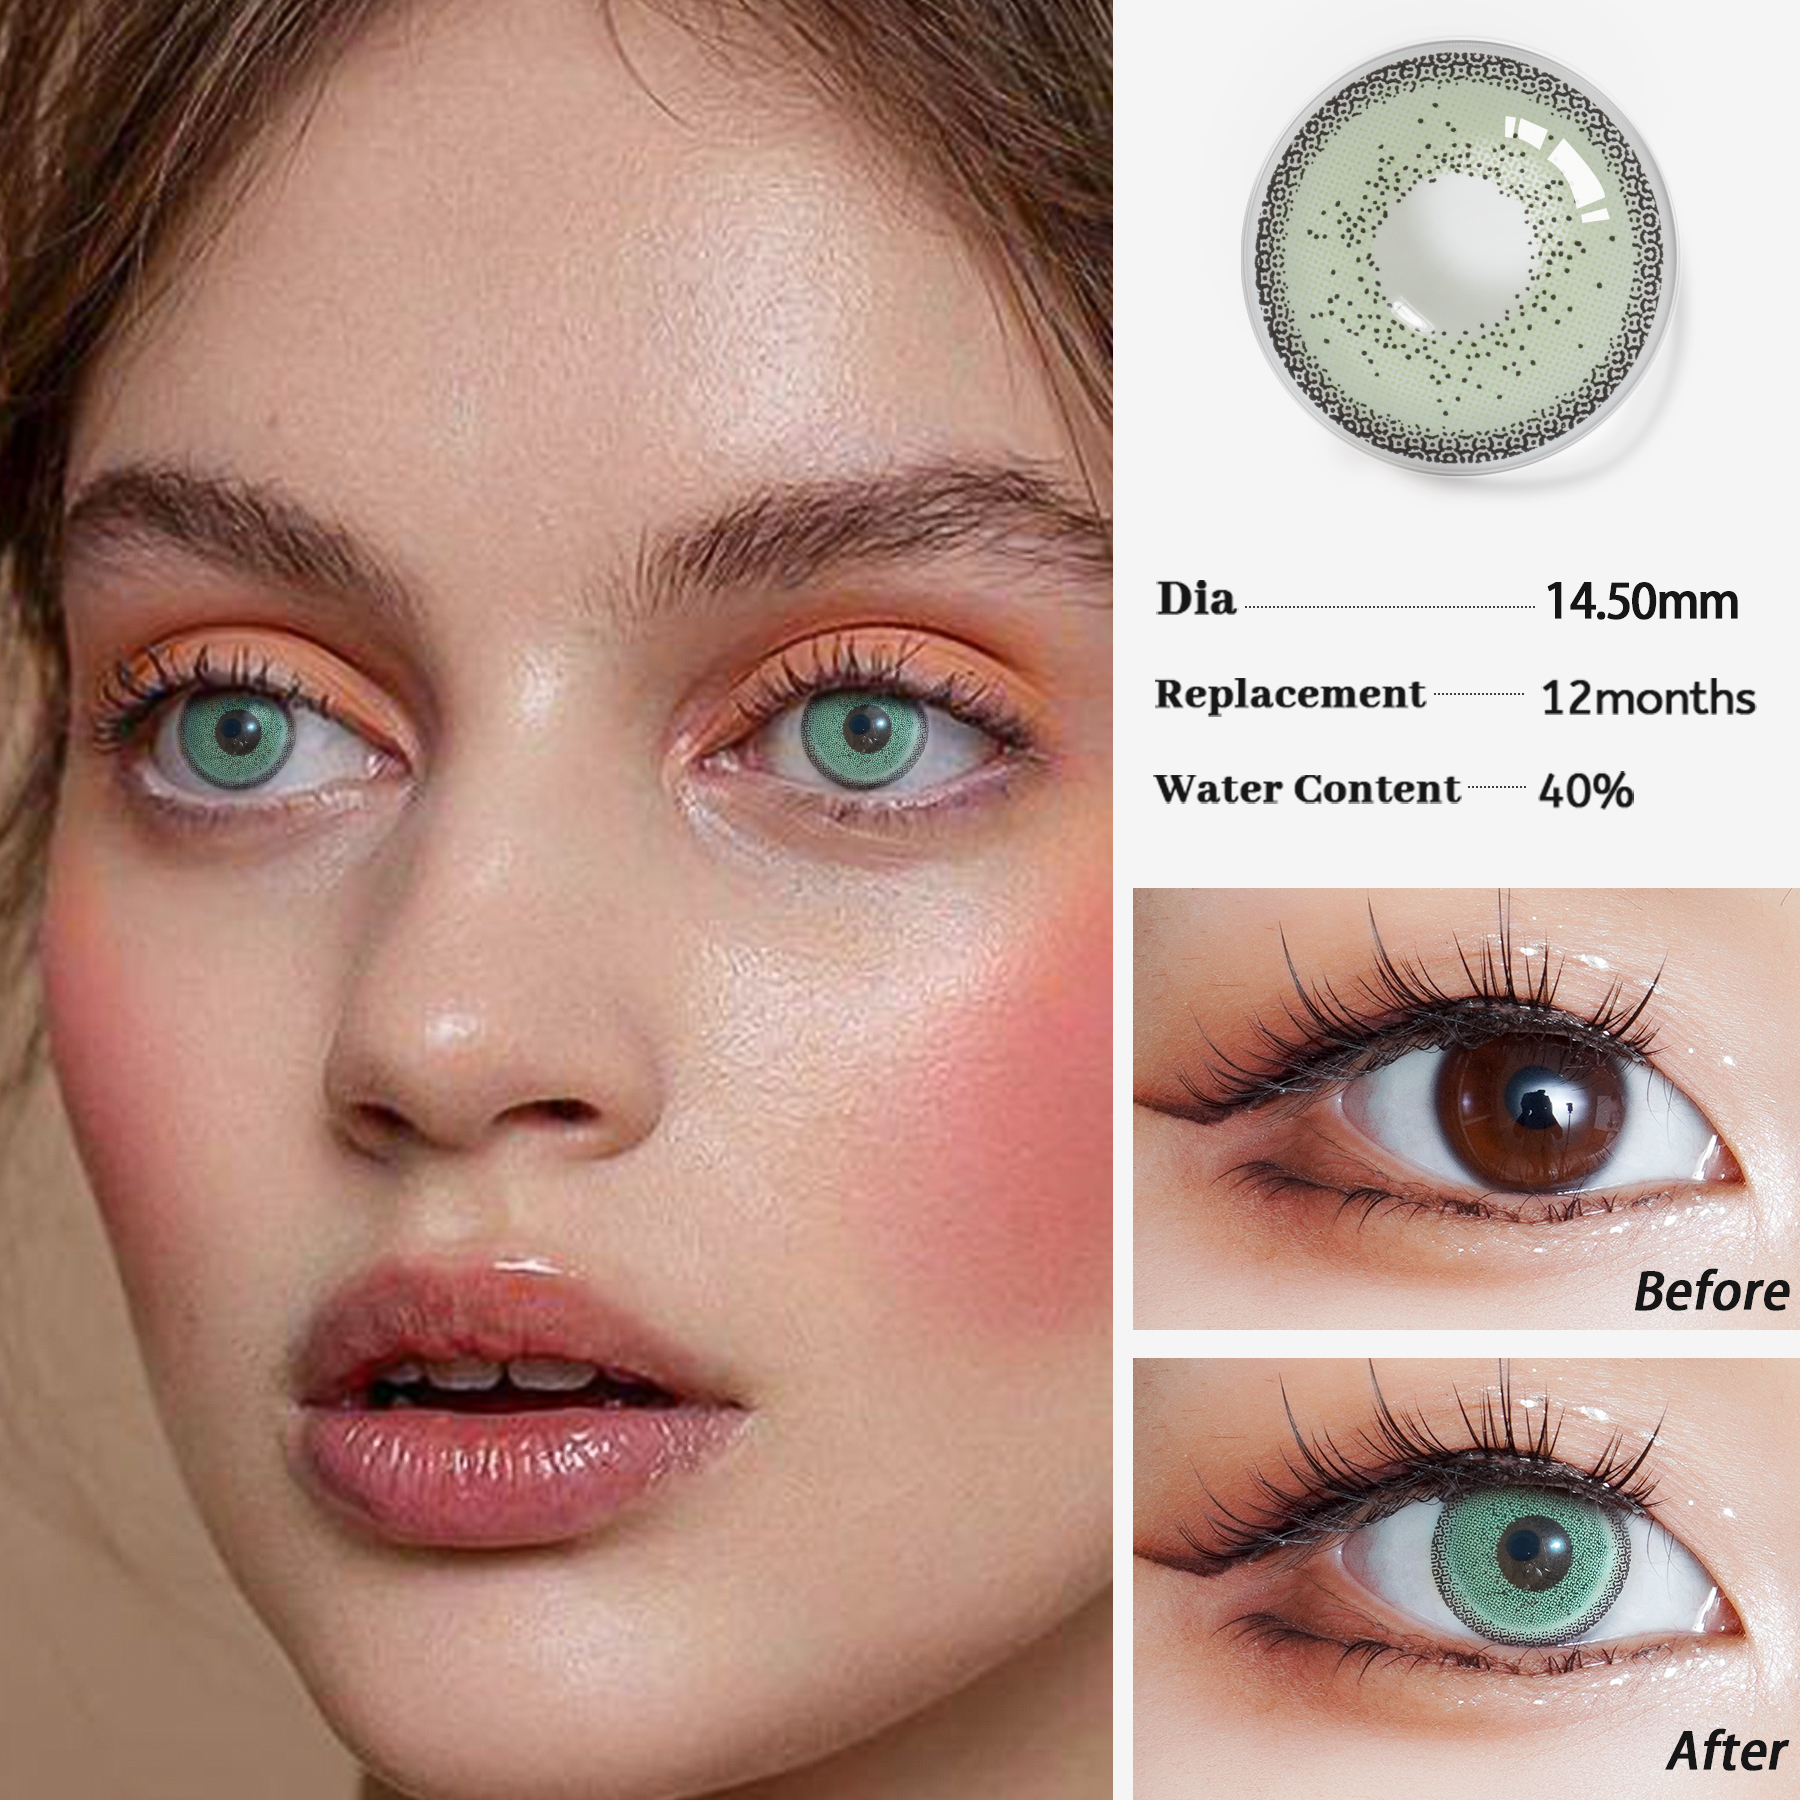 OLIVIA Hot sale Colored Eye Contact Lens oem Contacto de color 14.20mm 14.50mm Colour Contact Lenses